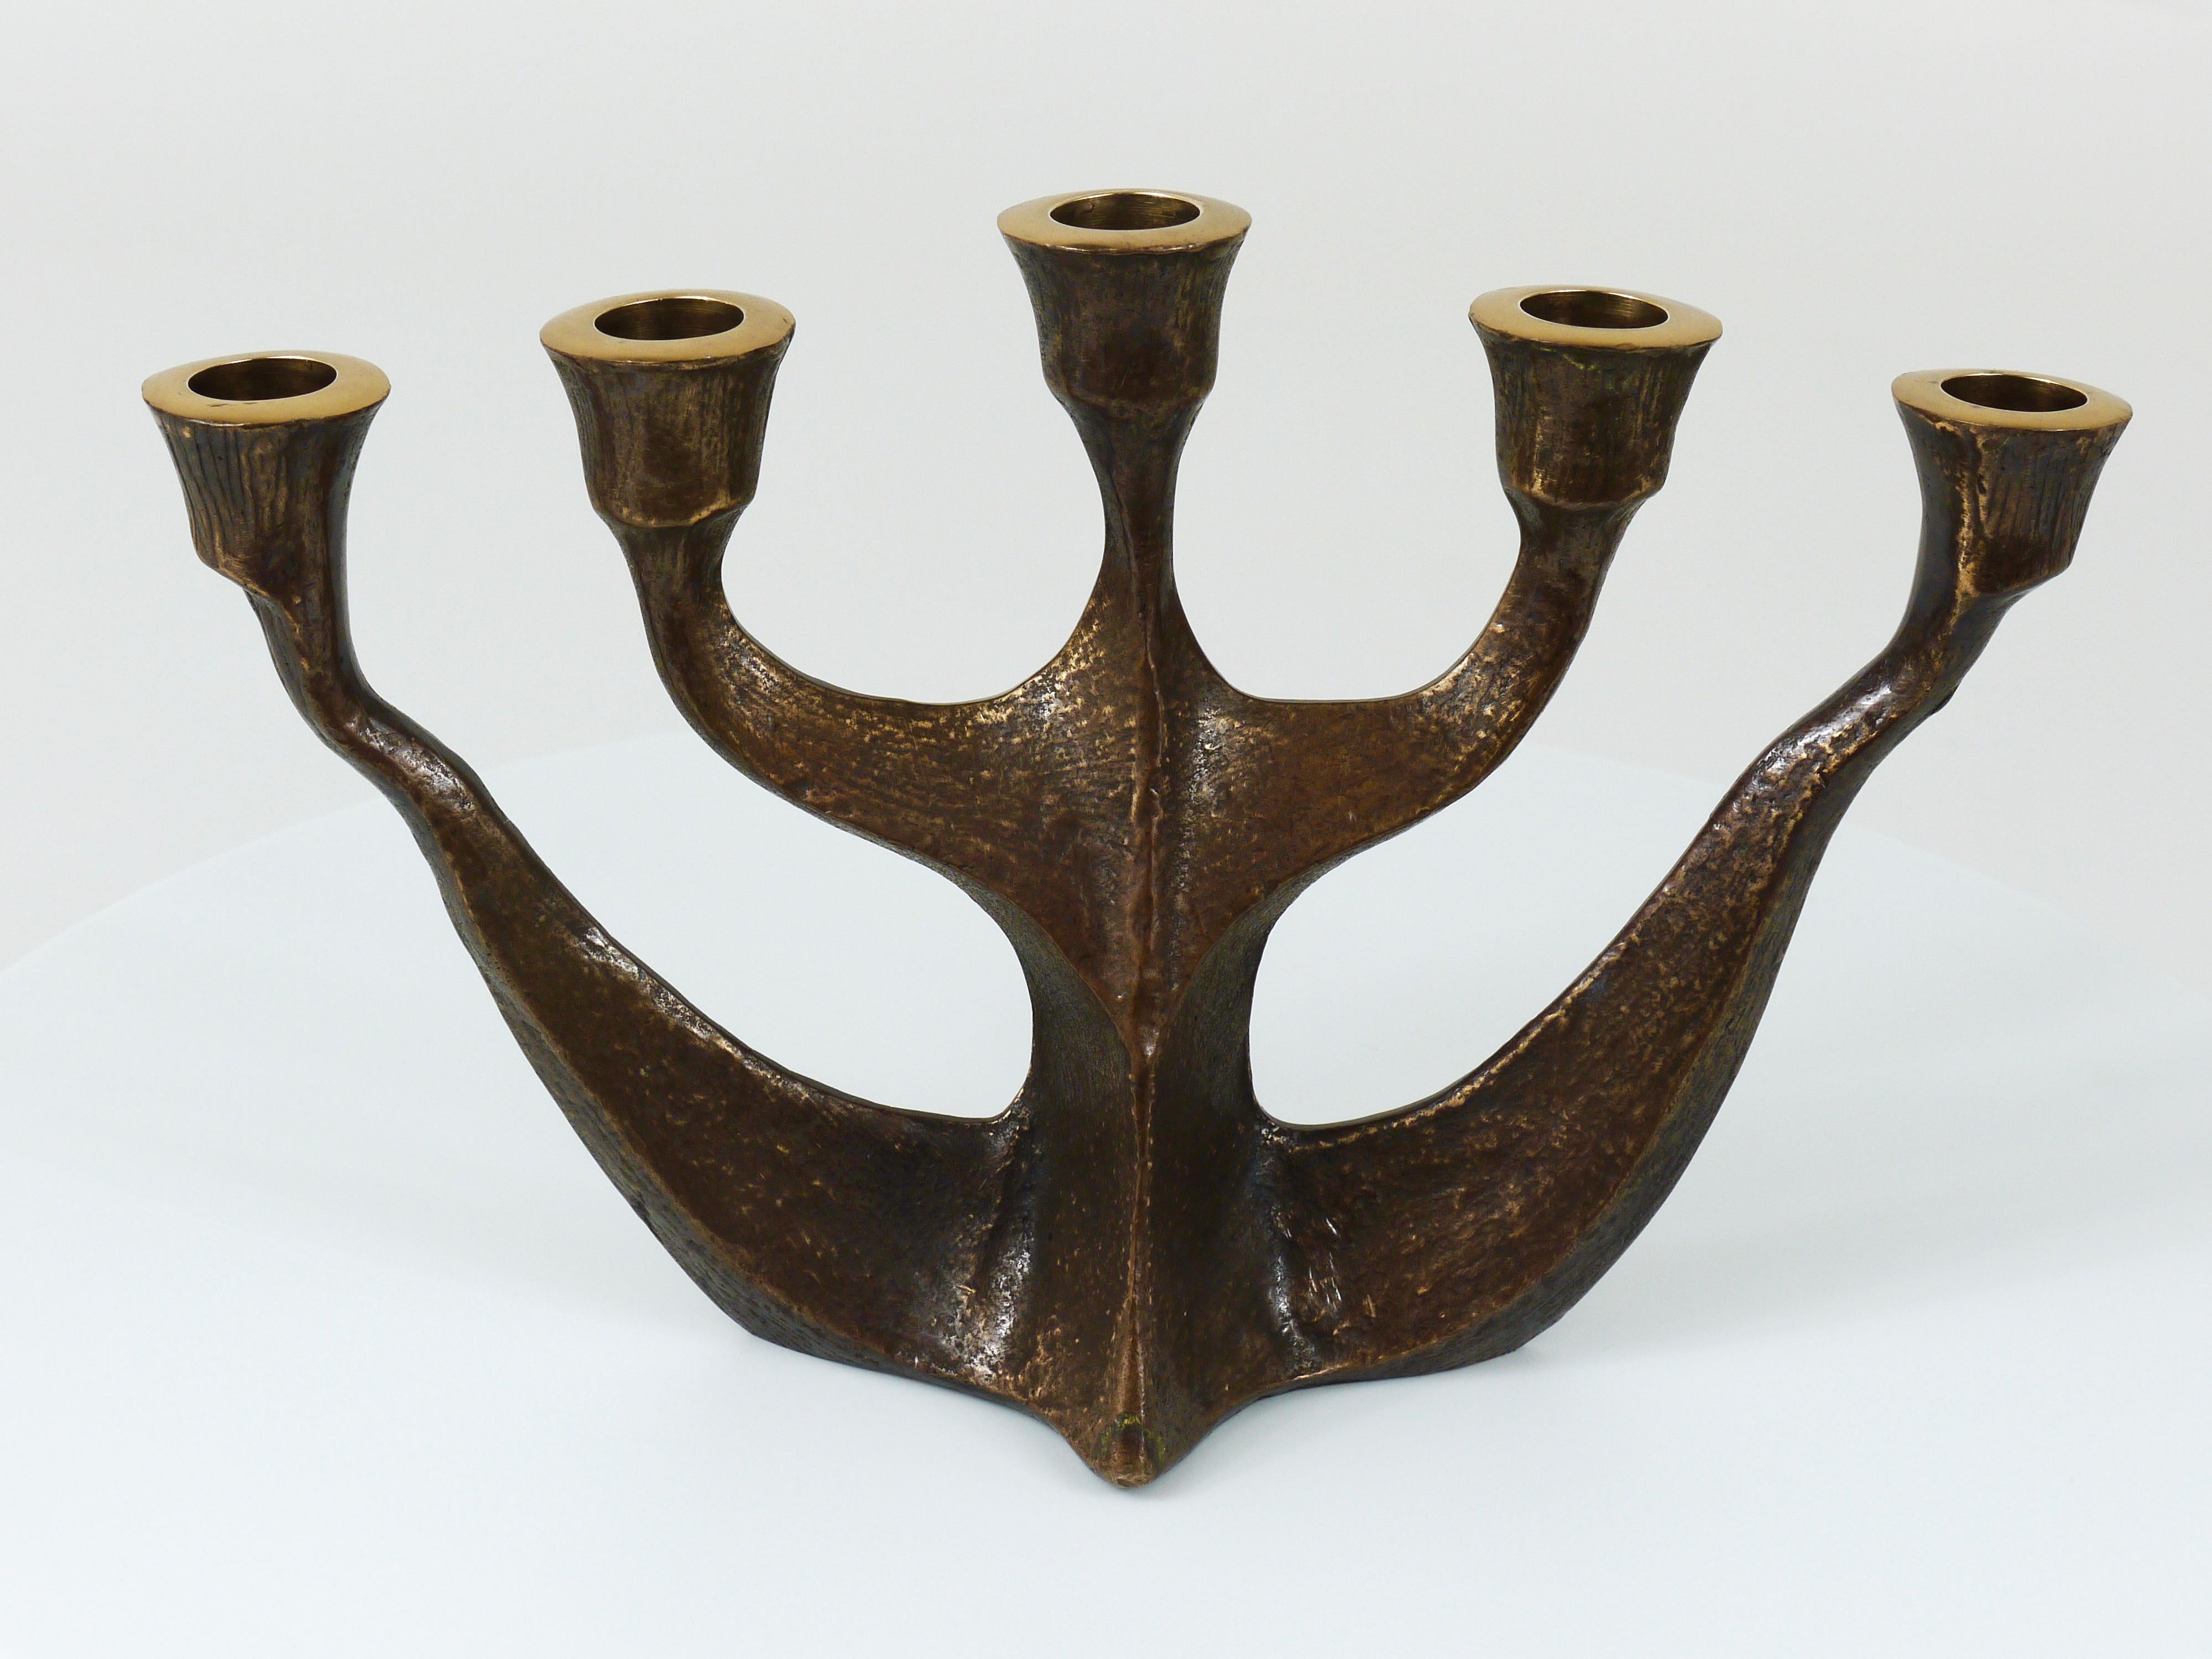 Up to Two Midcentury Brutalist Bronze Candleholders by Michael Harjes, 1960s For Sale 8